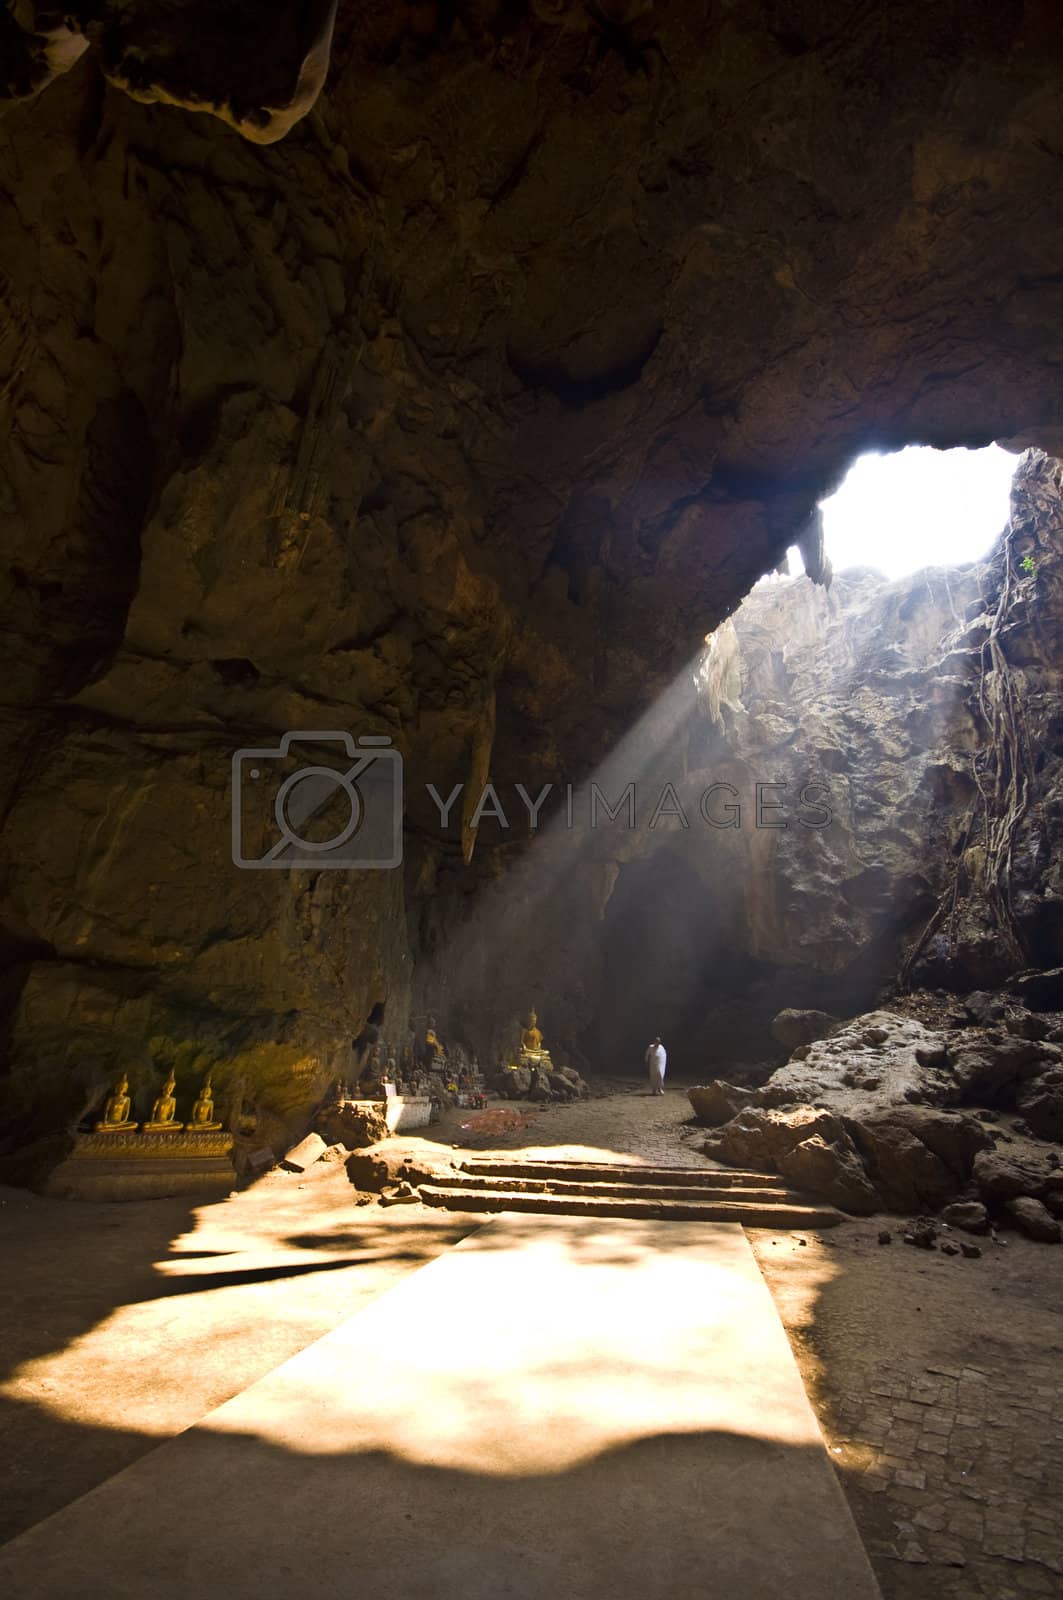 Royalty free image of Tham-Khao-Luang cave by Jule_Berlin